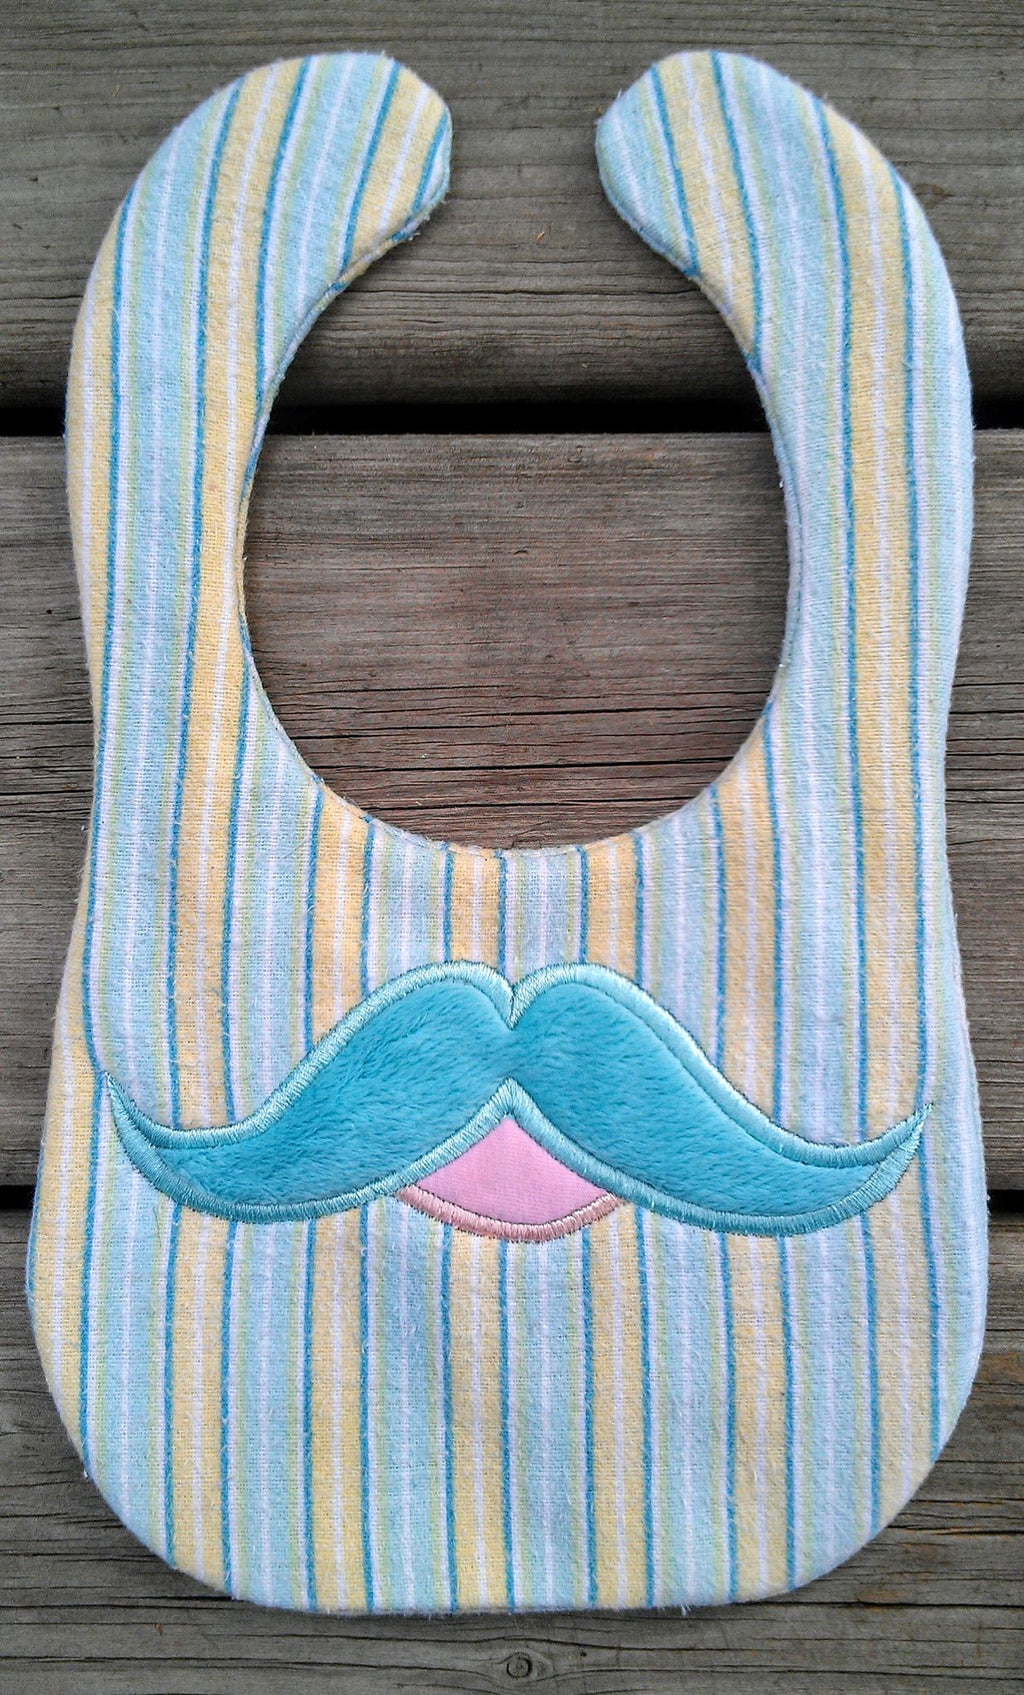 ITH In The hoop Bib with Mustache applique machine embroidery design